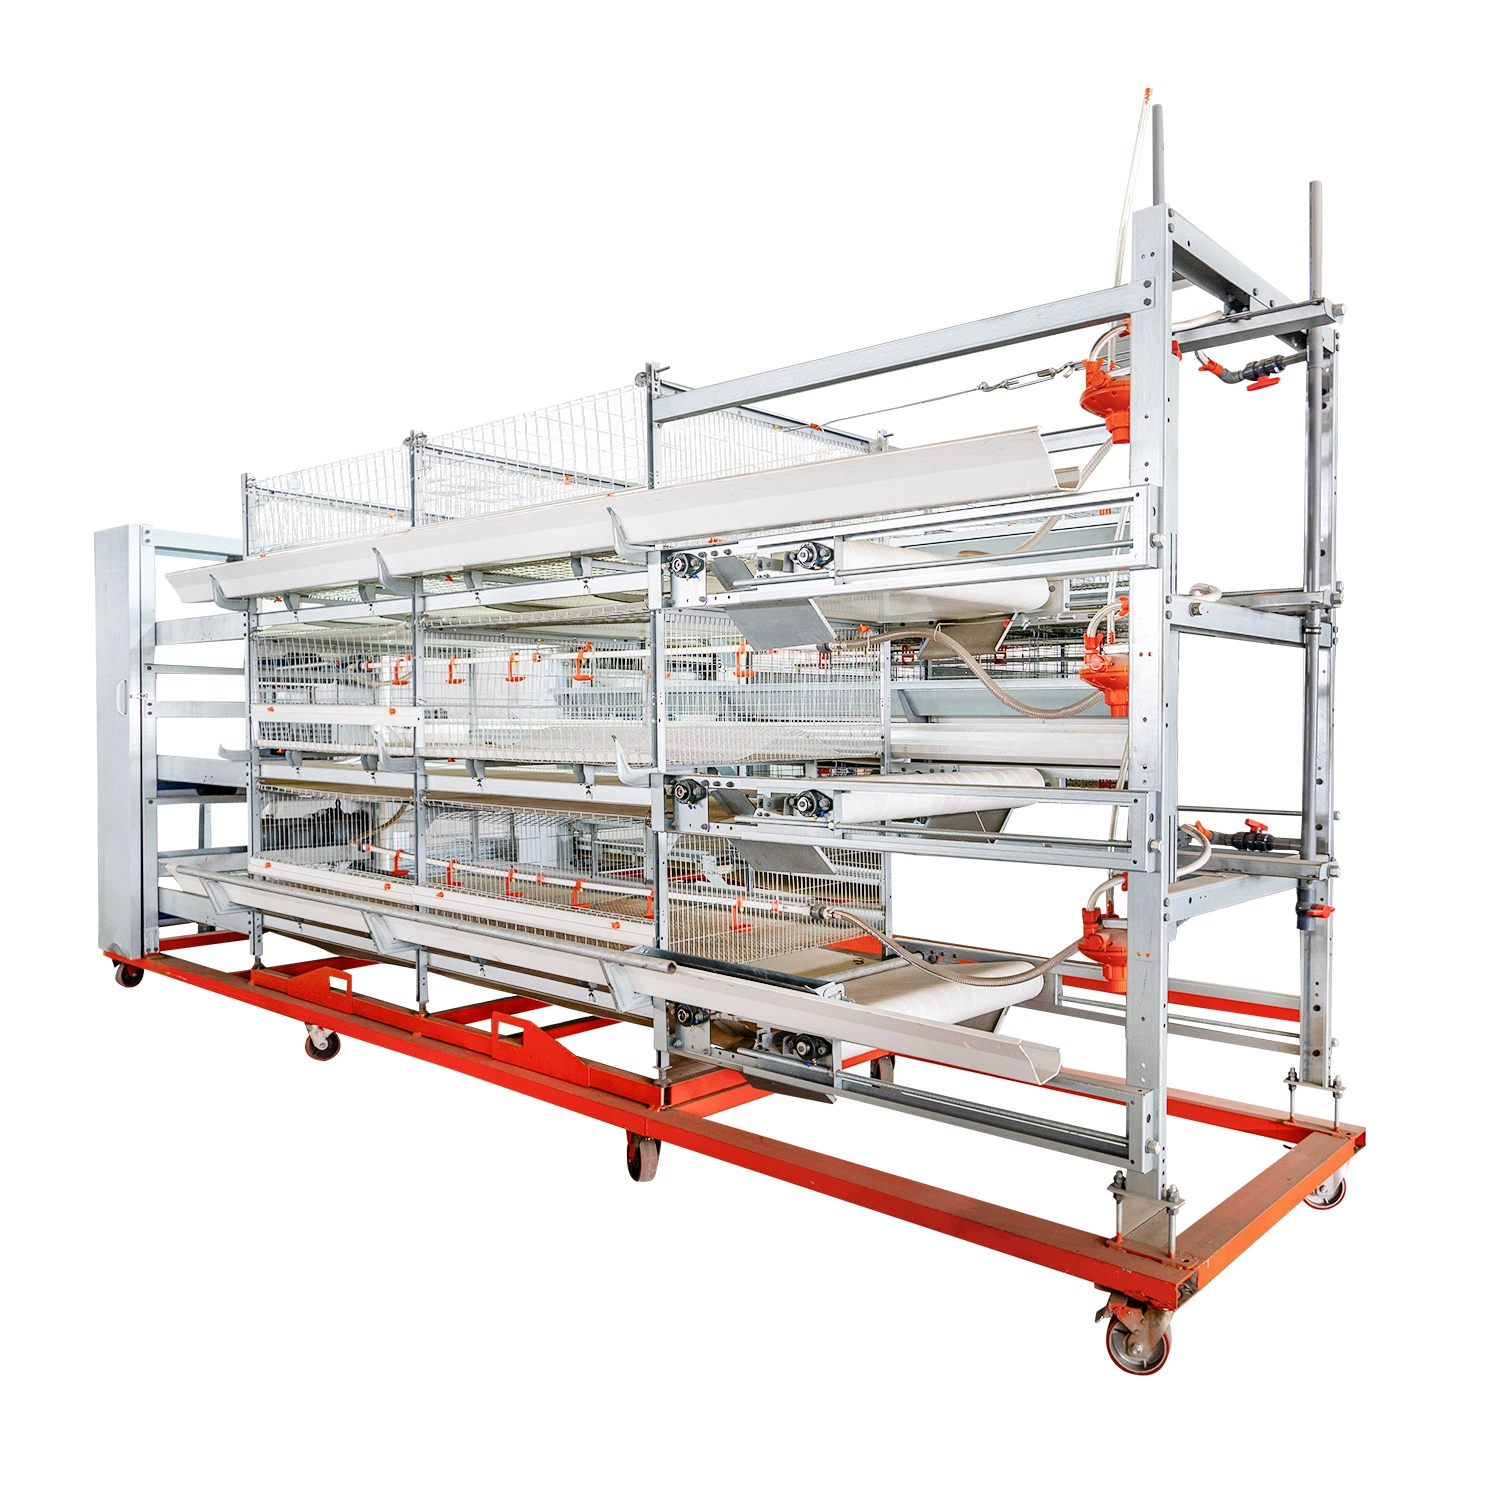 Livestock Machinery Poultry Farm Equipment Automatic Feeding Cages for Broiler